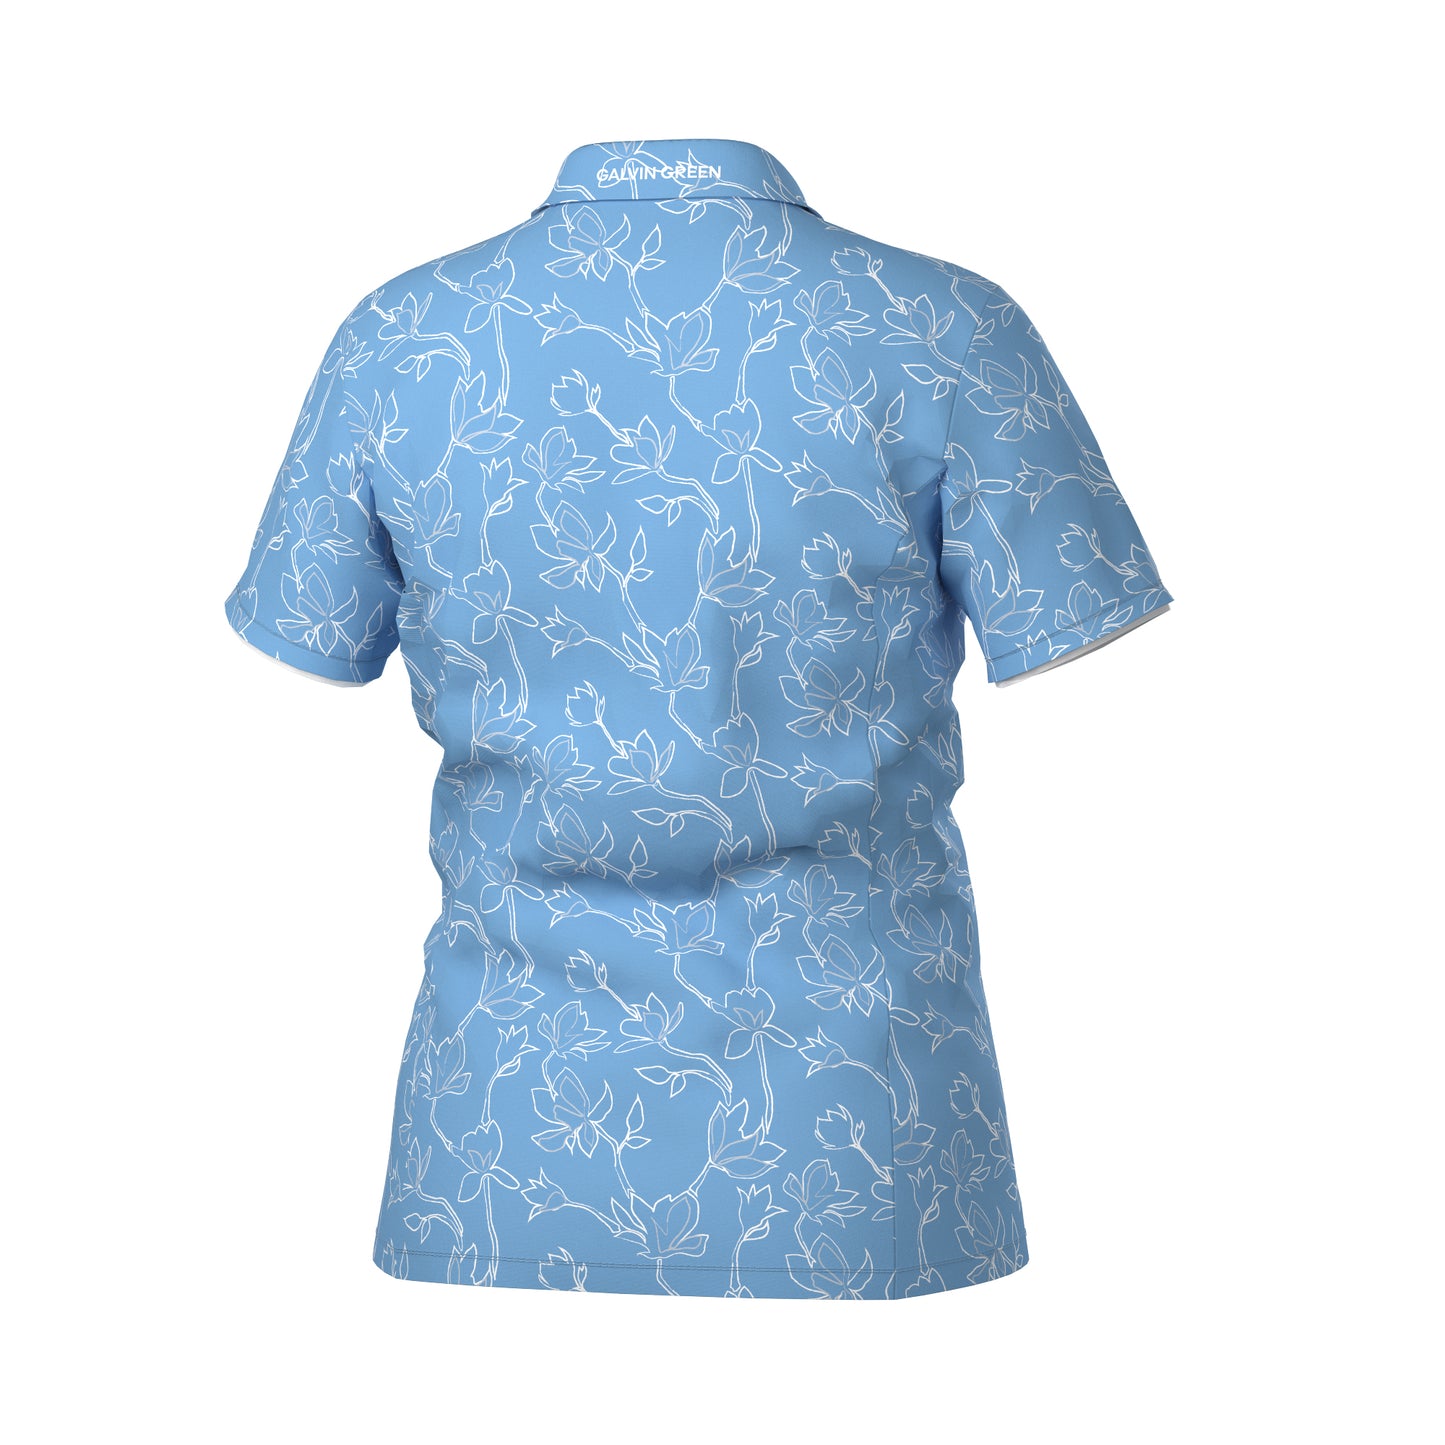 Galvin Green Ladies VENTIL8 PLUS Short Sleeve Polo with Floral Print in Alaskan Blue